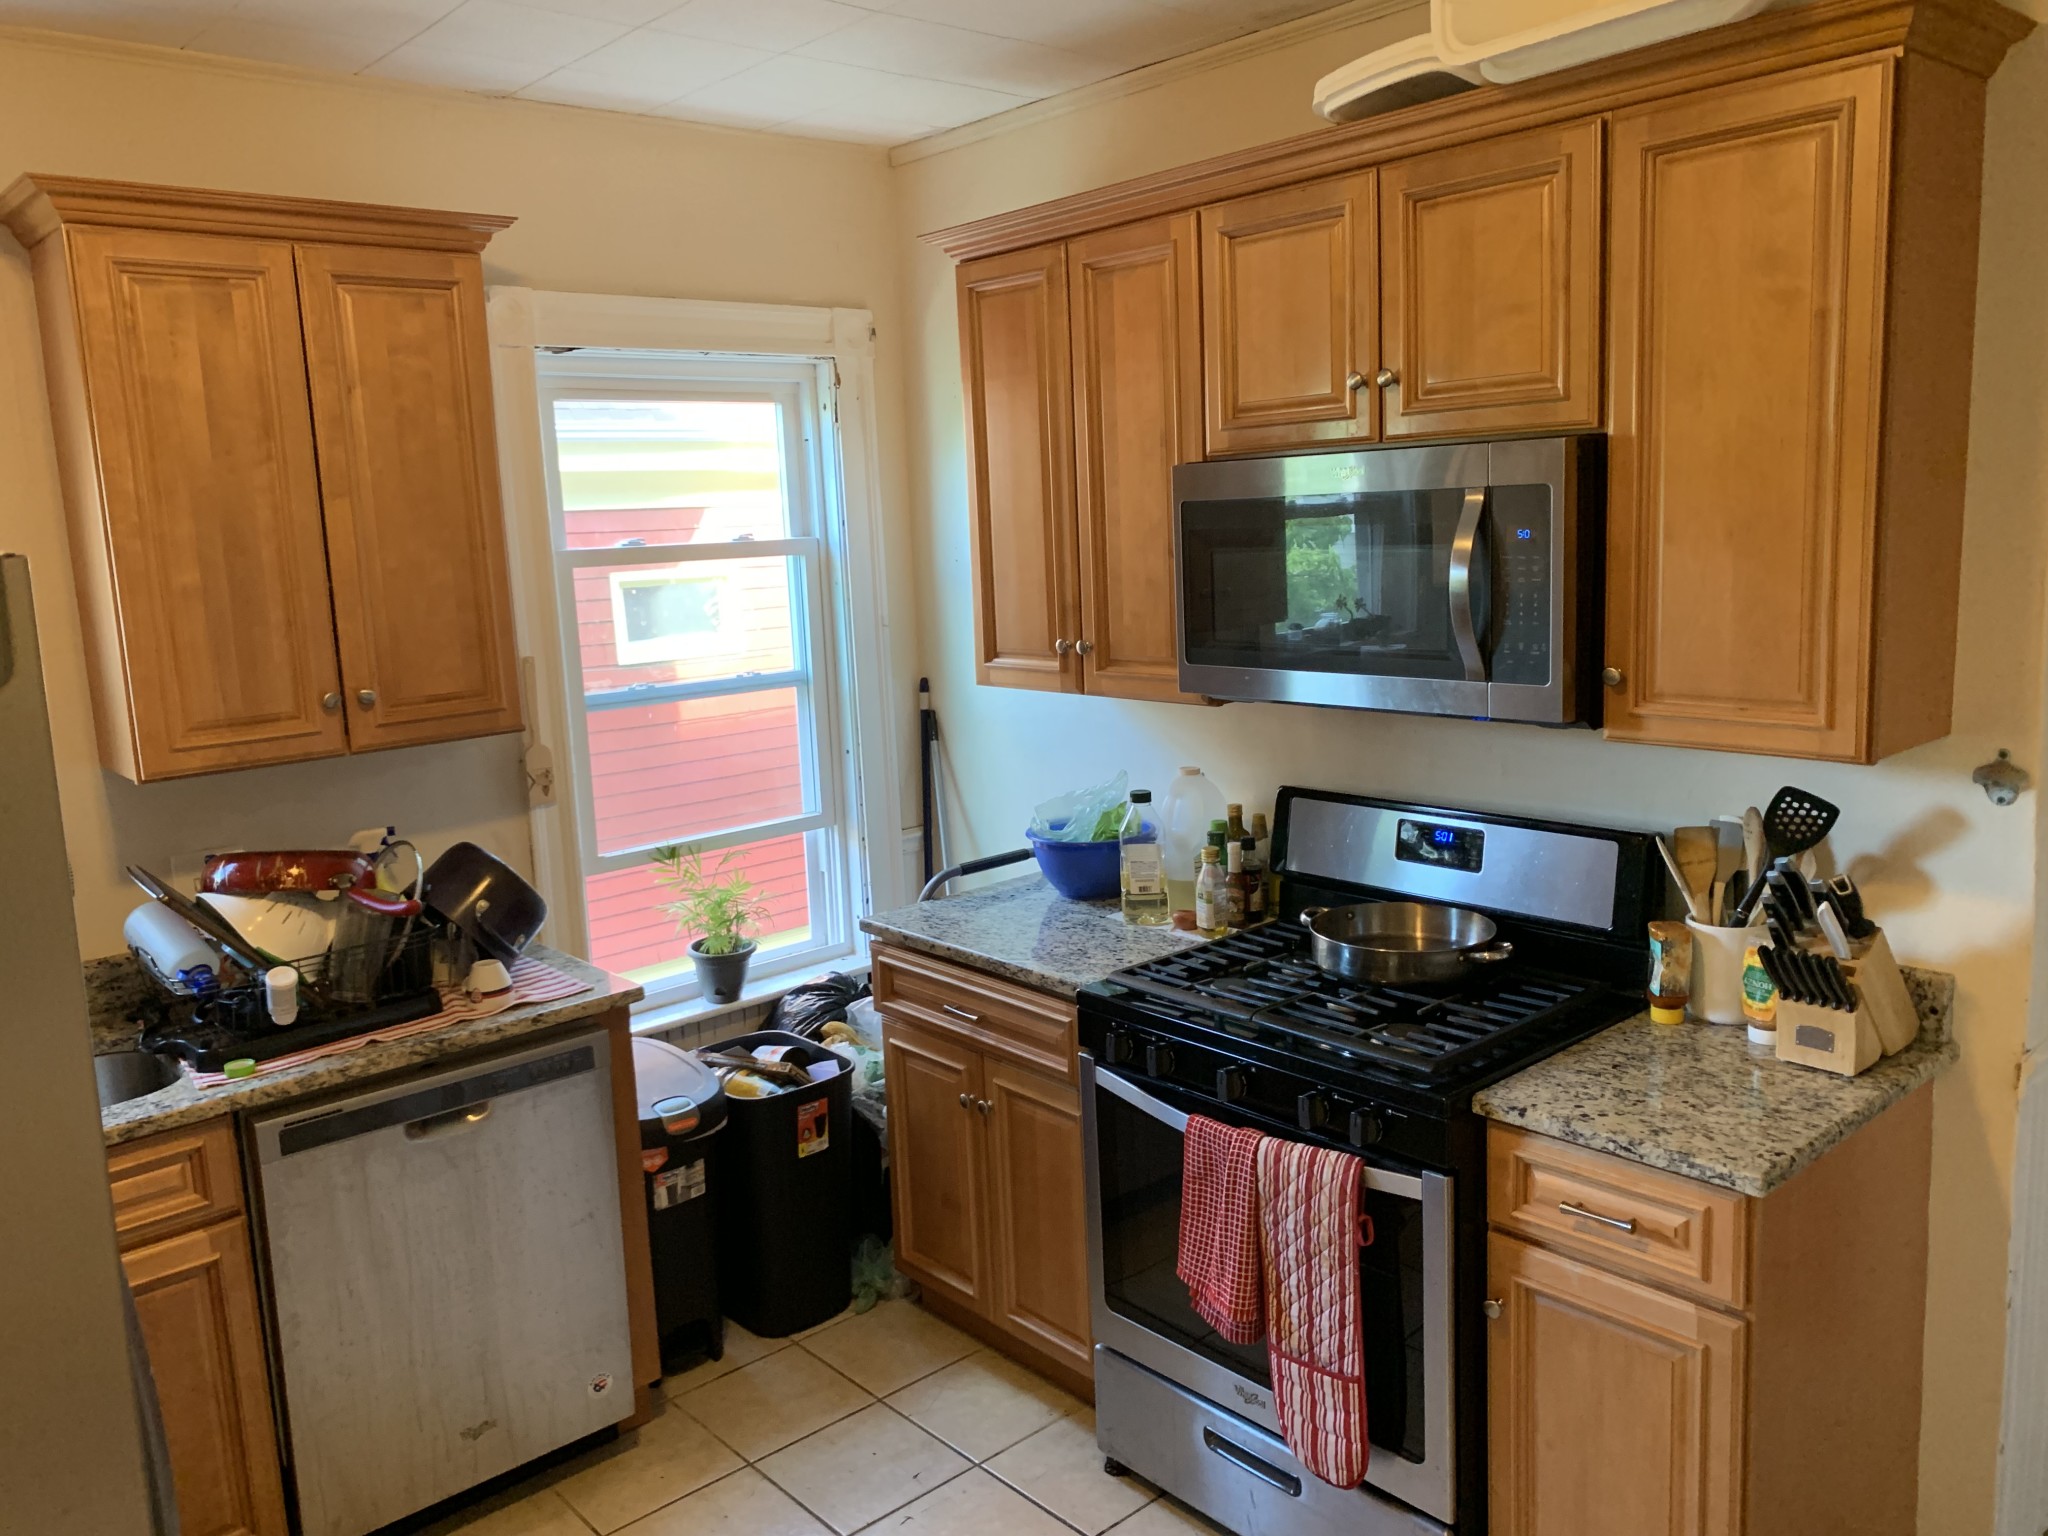 Photos of apartment on Broadway,Somerville MA 02144